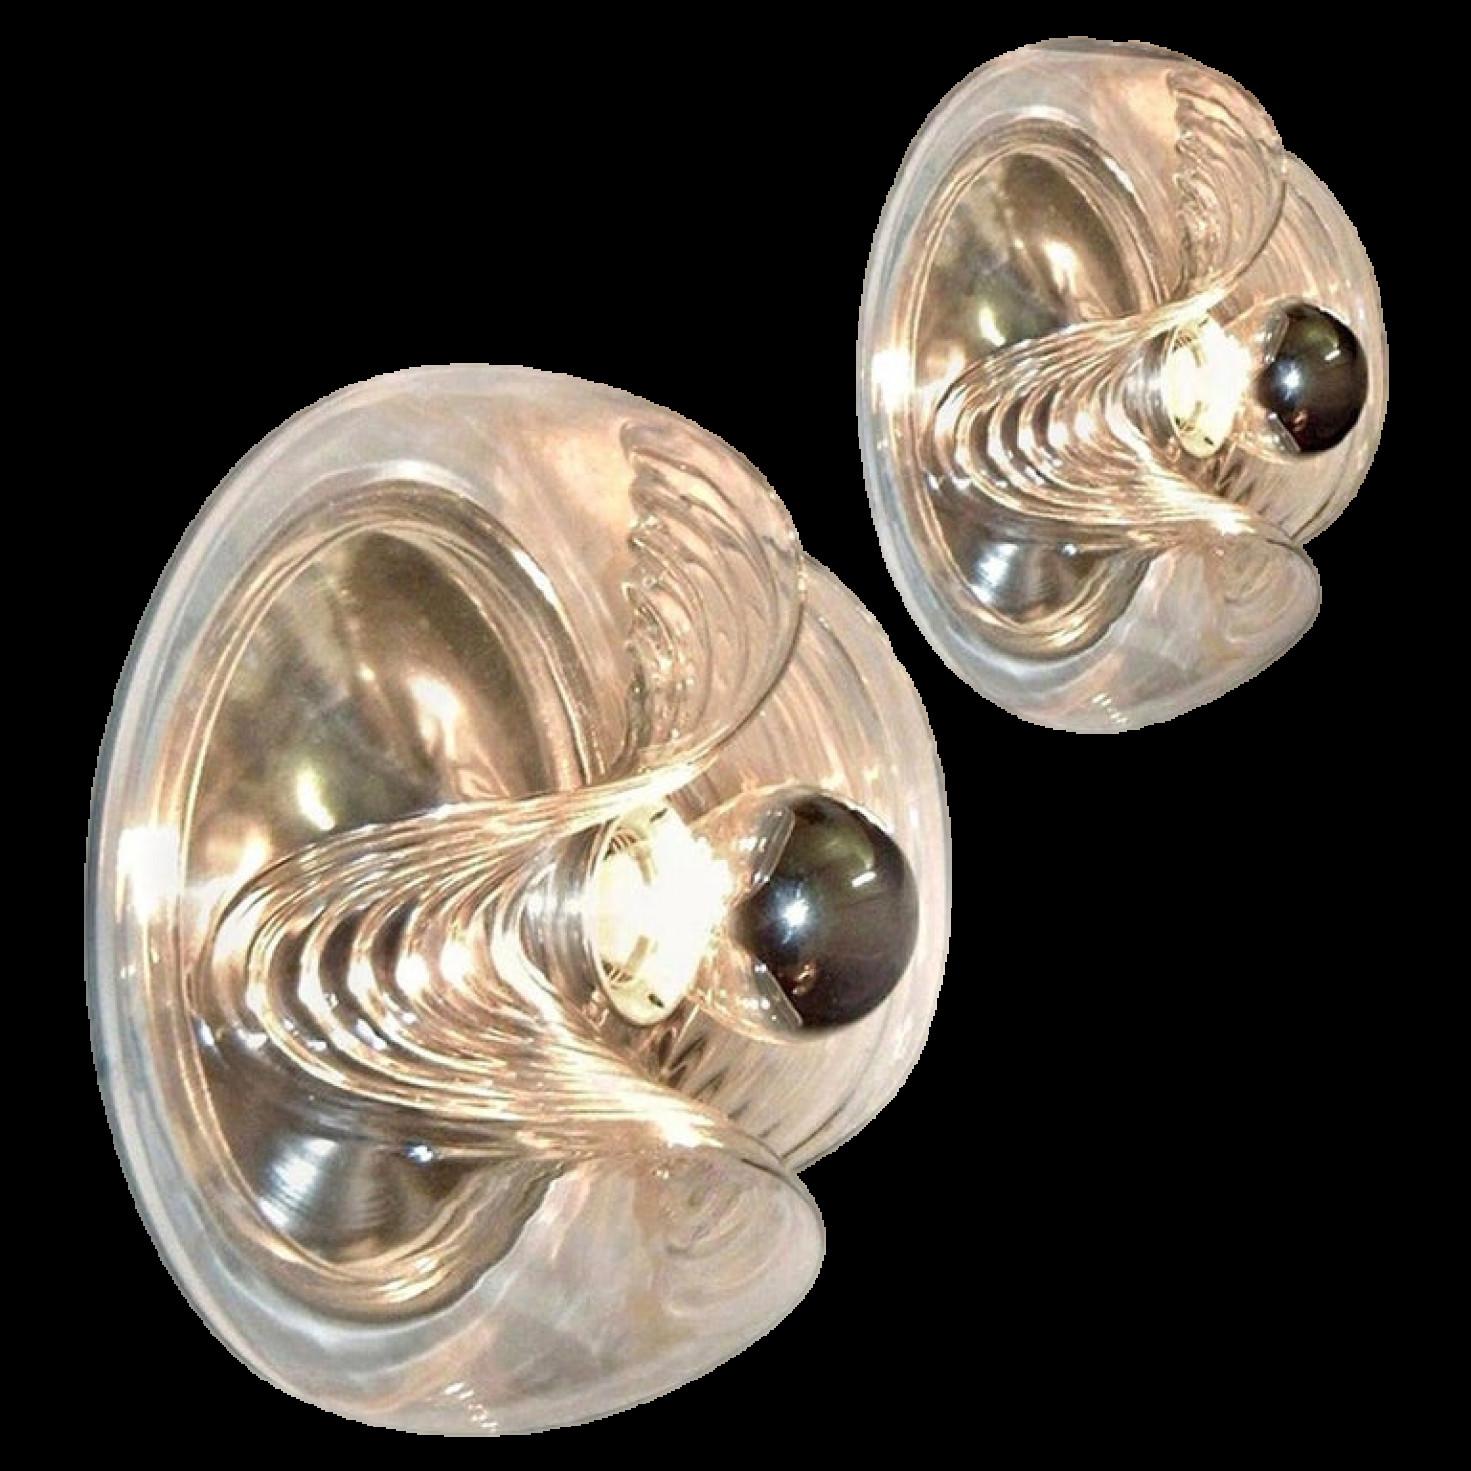 Pair of mid-20th century flush mount or wall sconces designed by Koch & Lowy for Peill & Putzler in the 1970s. Featuring a clear glass globe shade with a waved or ribbed molded bubble form, casting a stunning rippled light across a wall or ceiling.